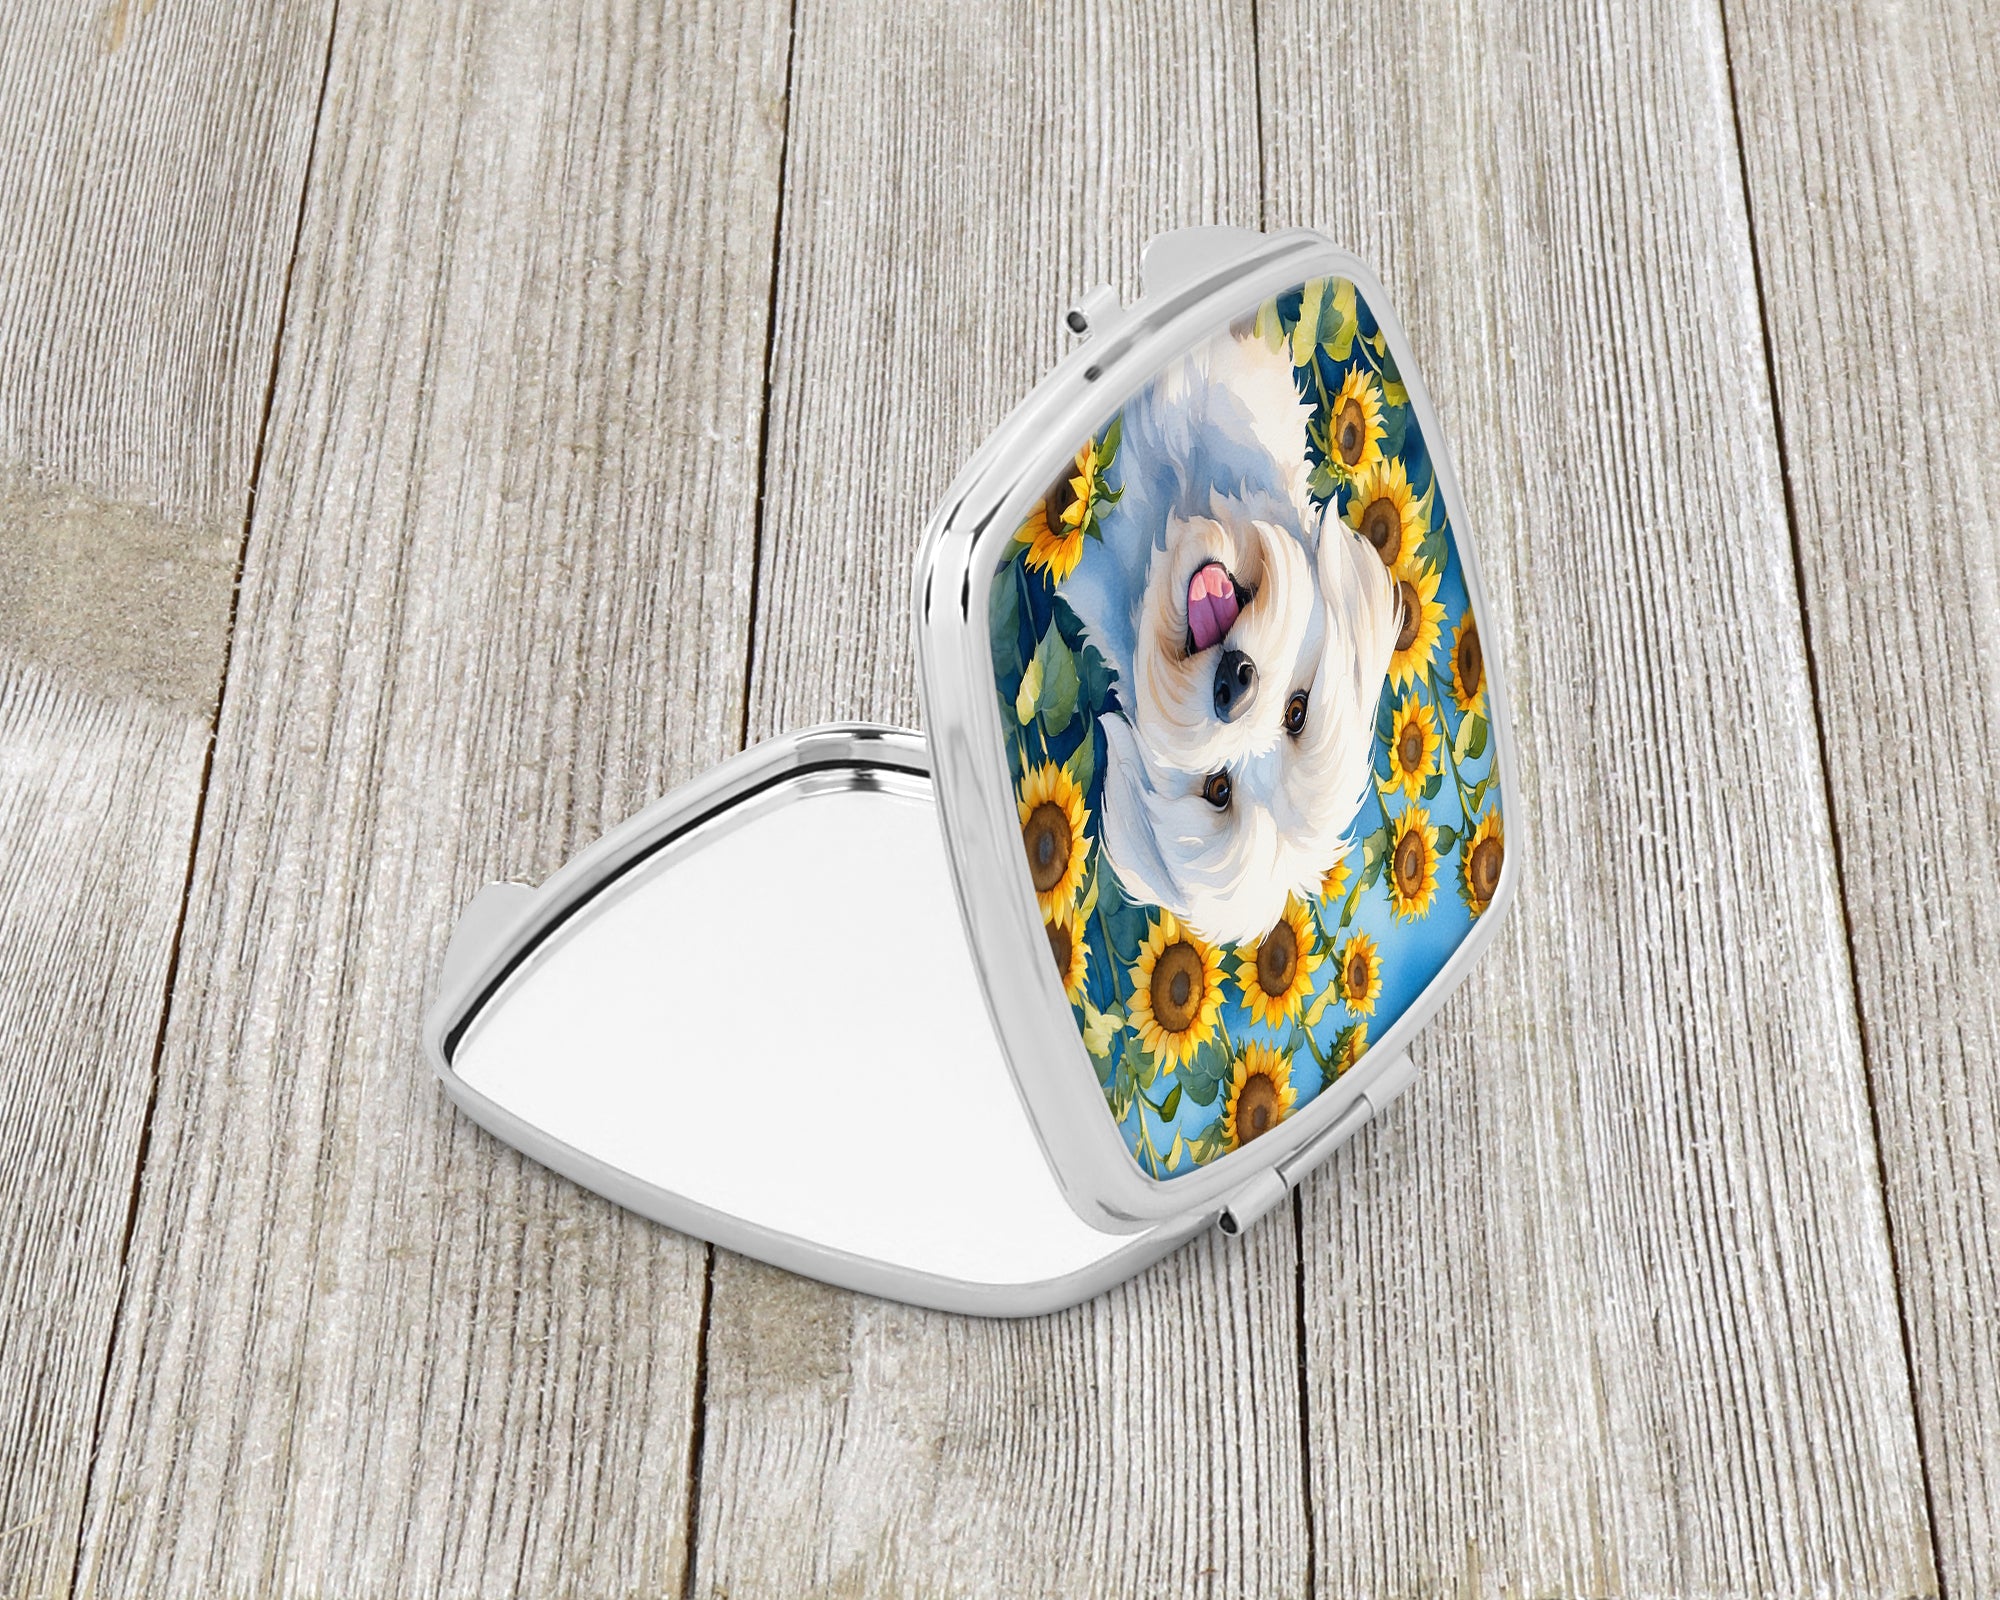 Buy this Coton de Tulear in Sunflowers Compact Mirror